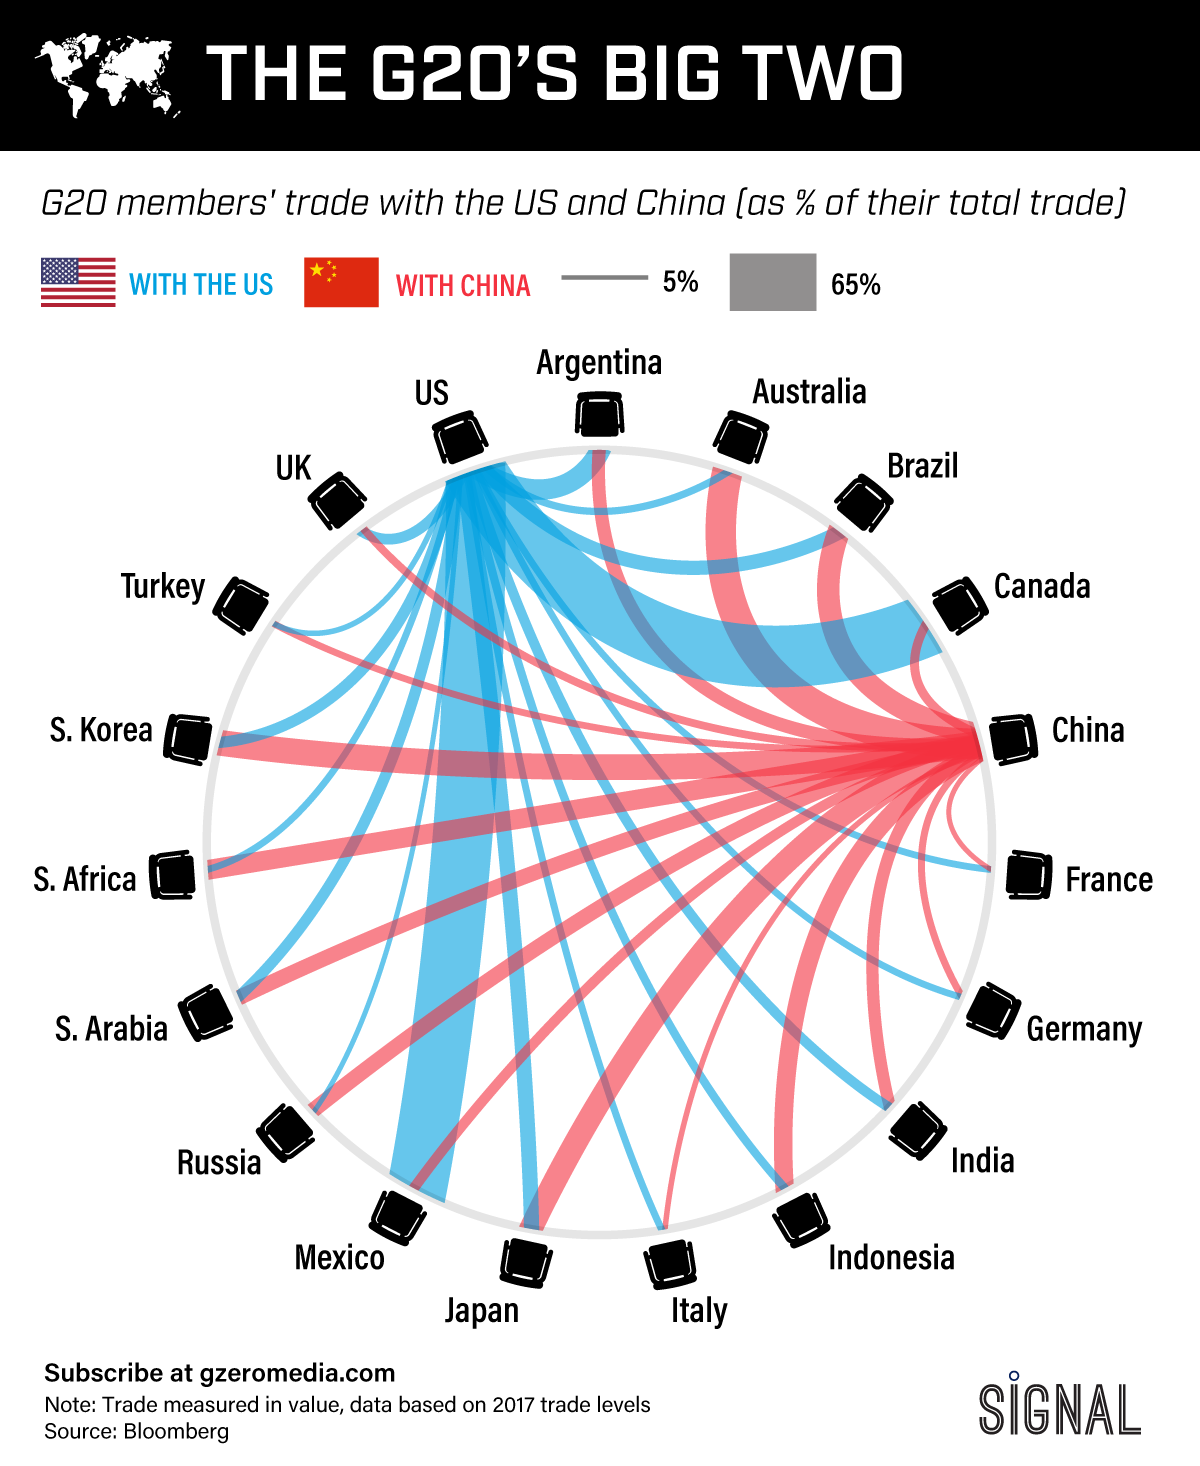 GRAPHIC TRUTH: THE G20’S BIG TWO